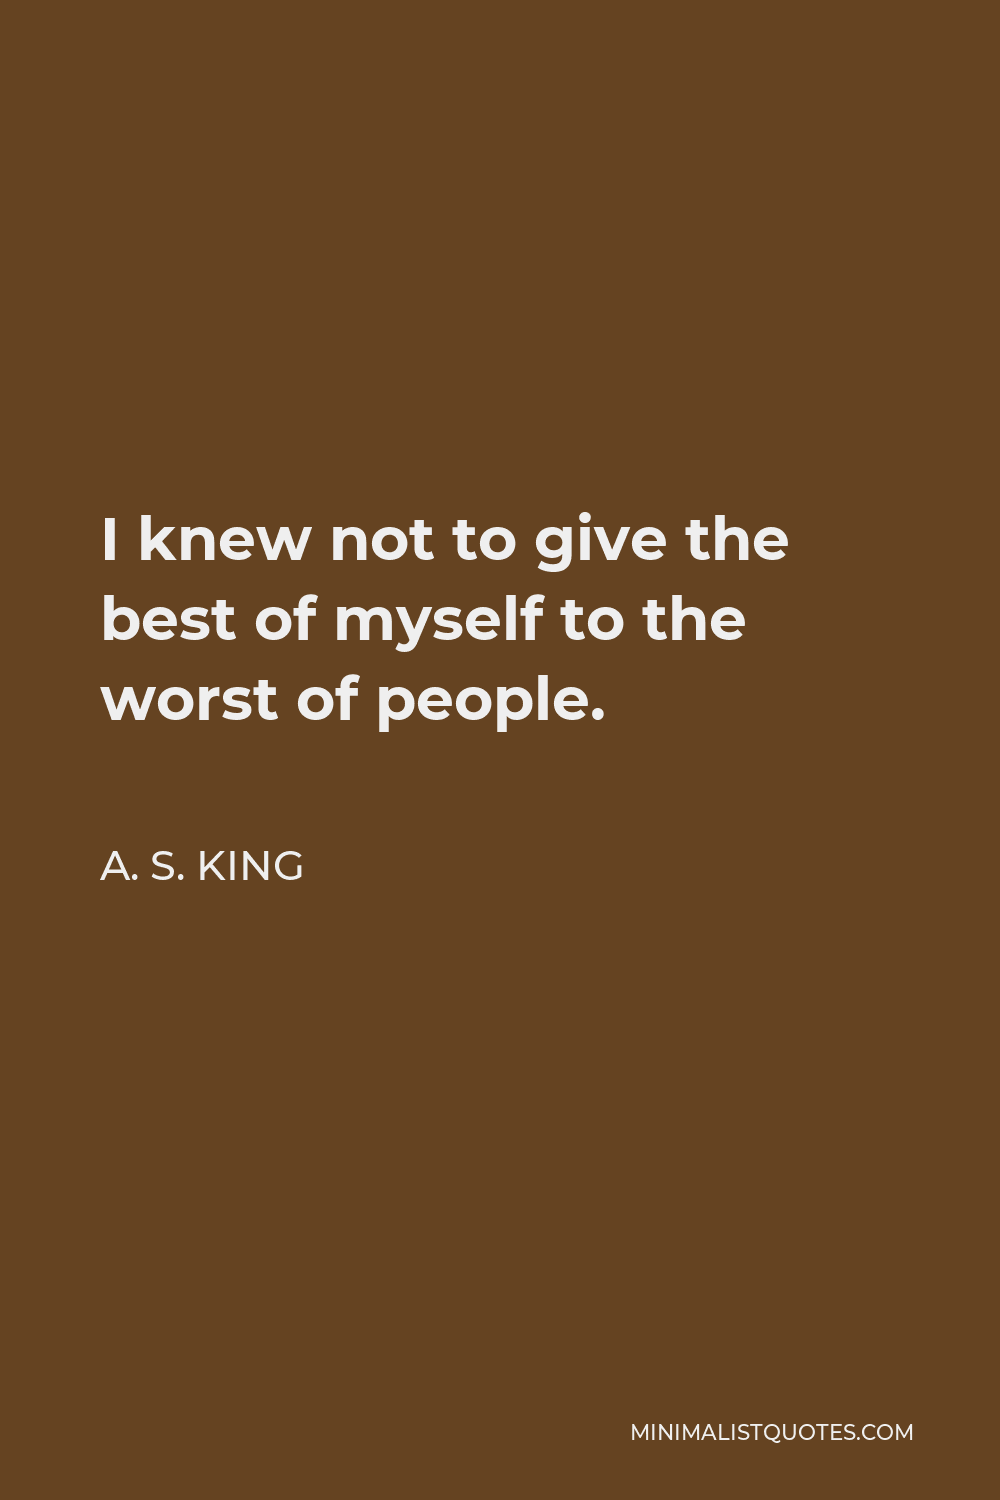 A. S. King Quote - I knew not to give the best of myself to the worst of people.